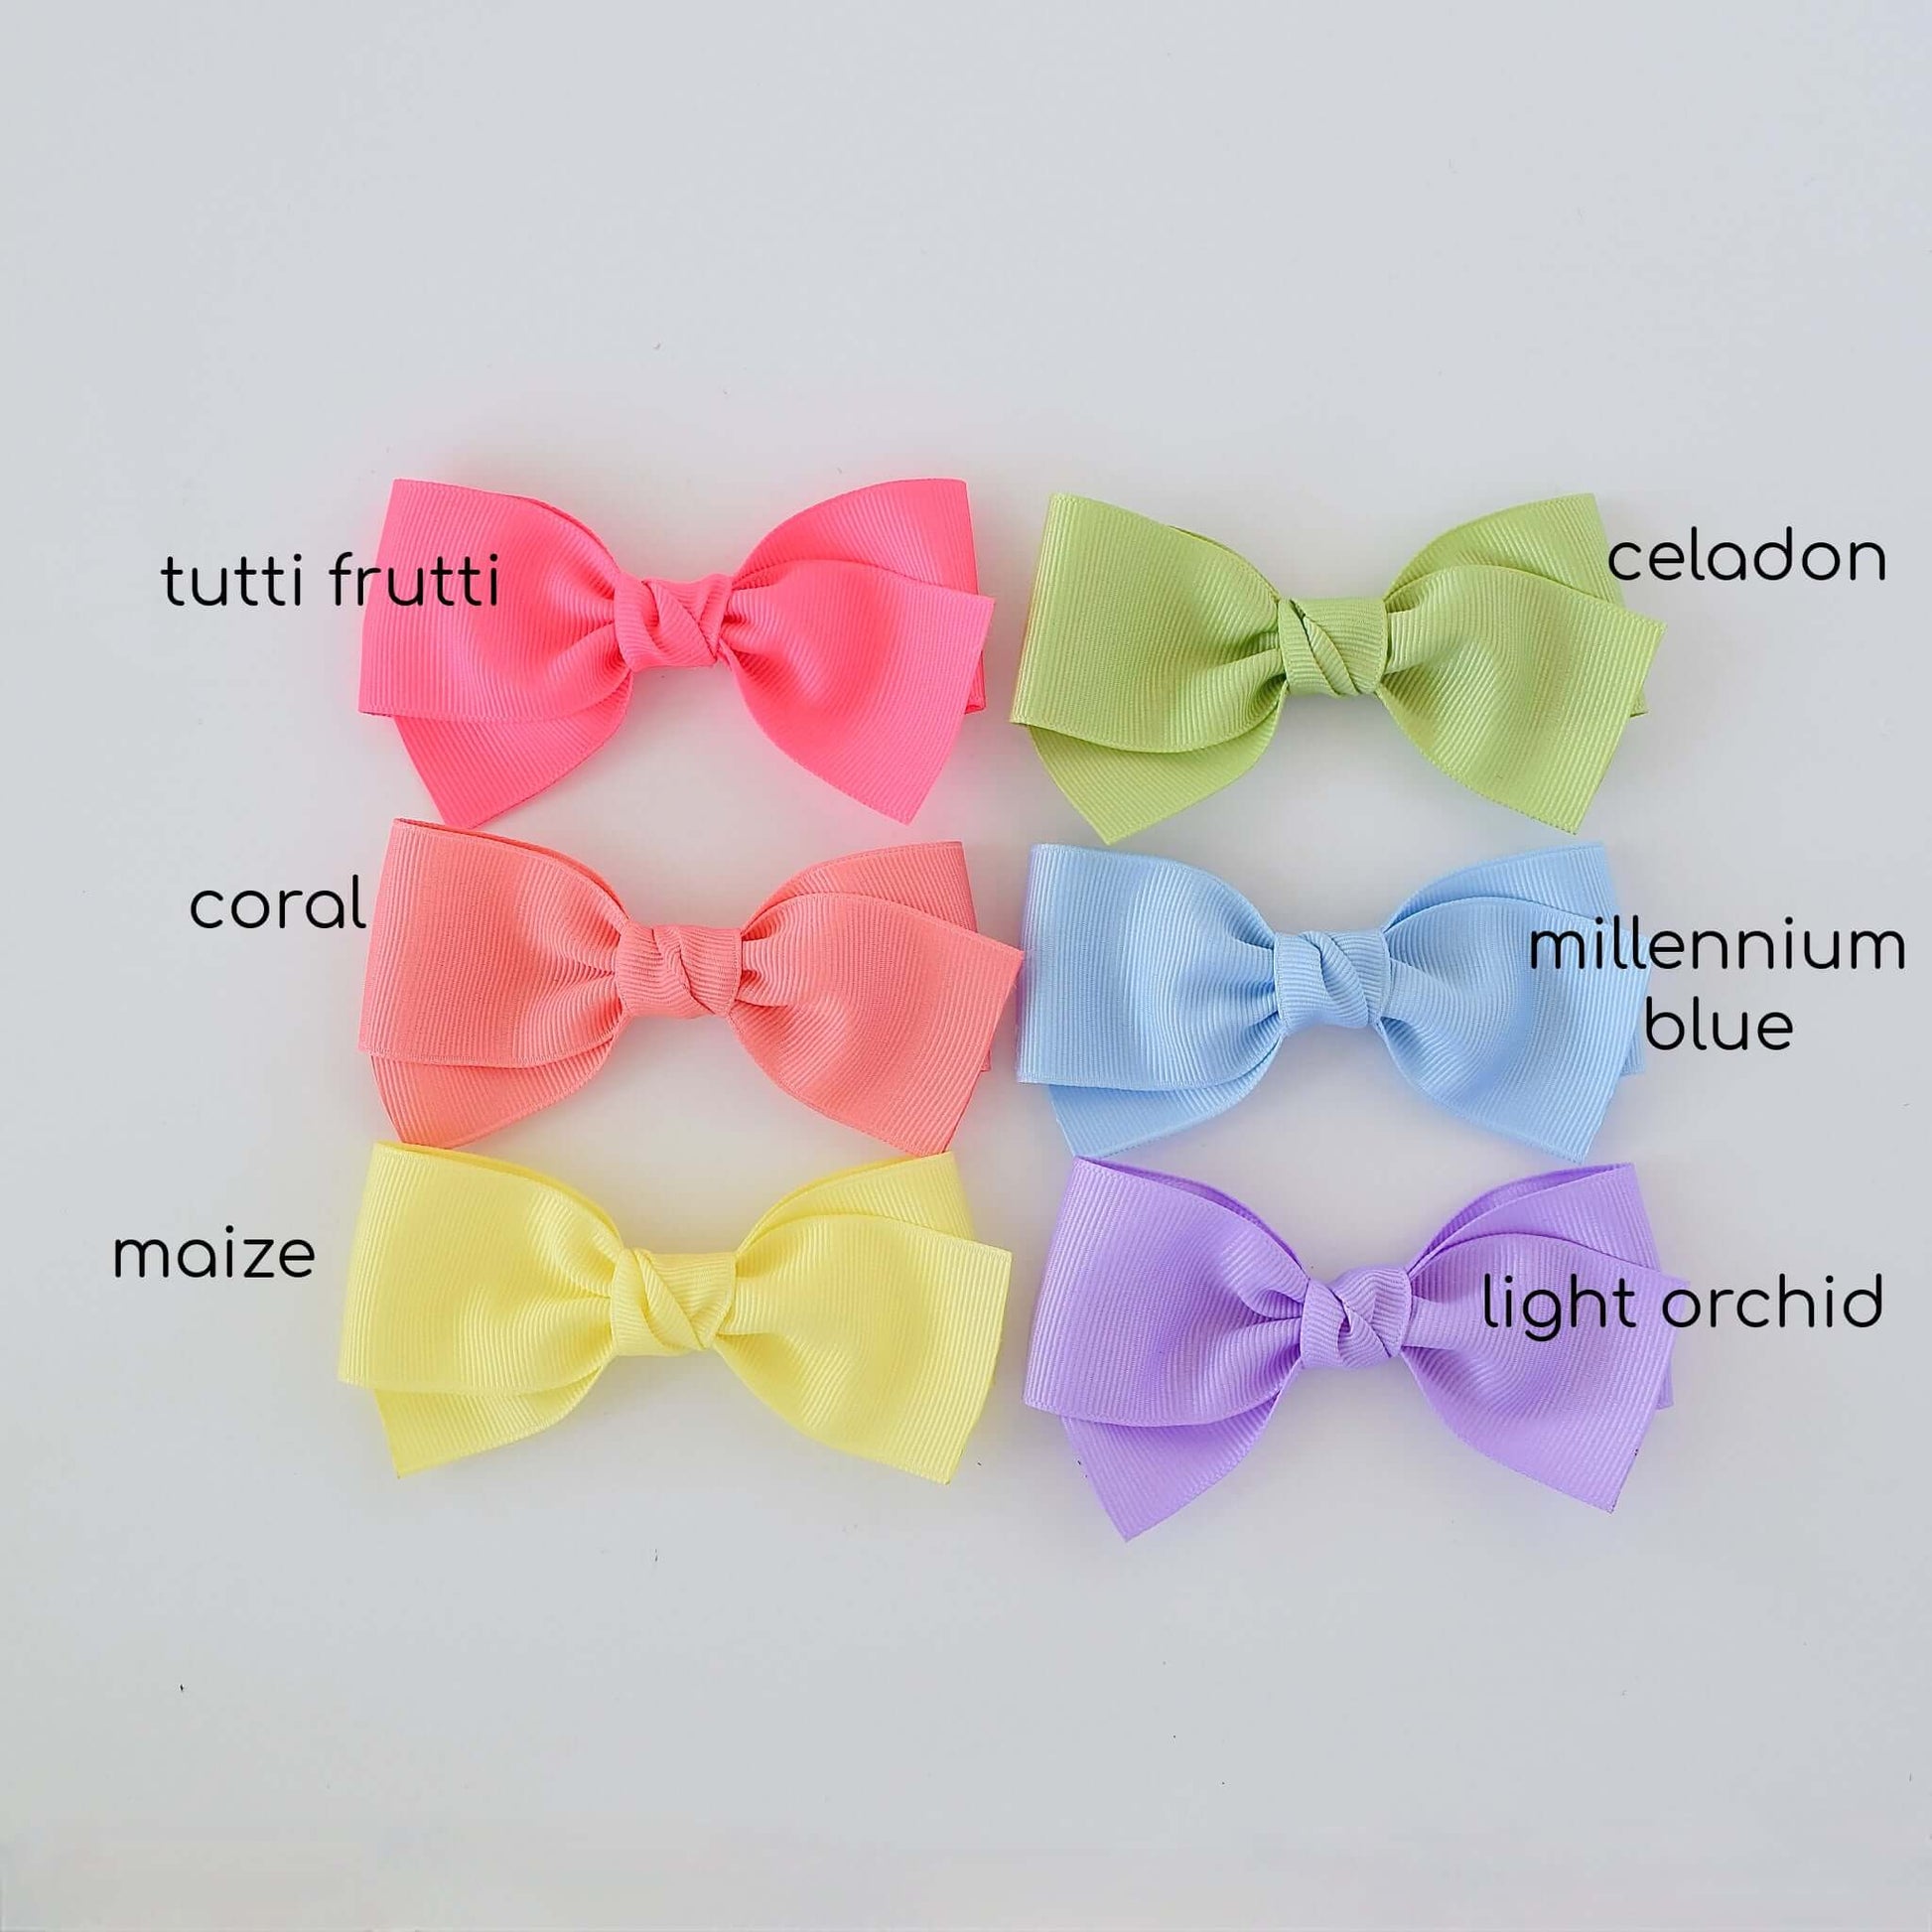 Six pastel-colored grosgrain baby Kayla hair bows in pink, green, coral, blue, yellow, and lavender displayed on a light background.